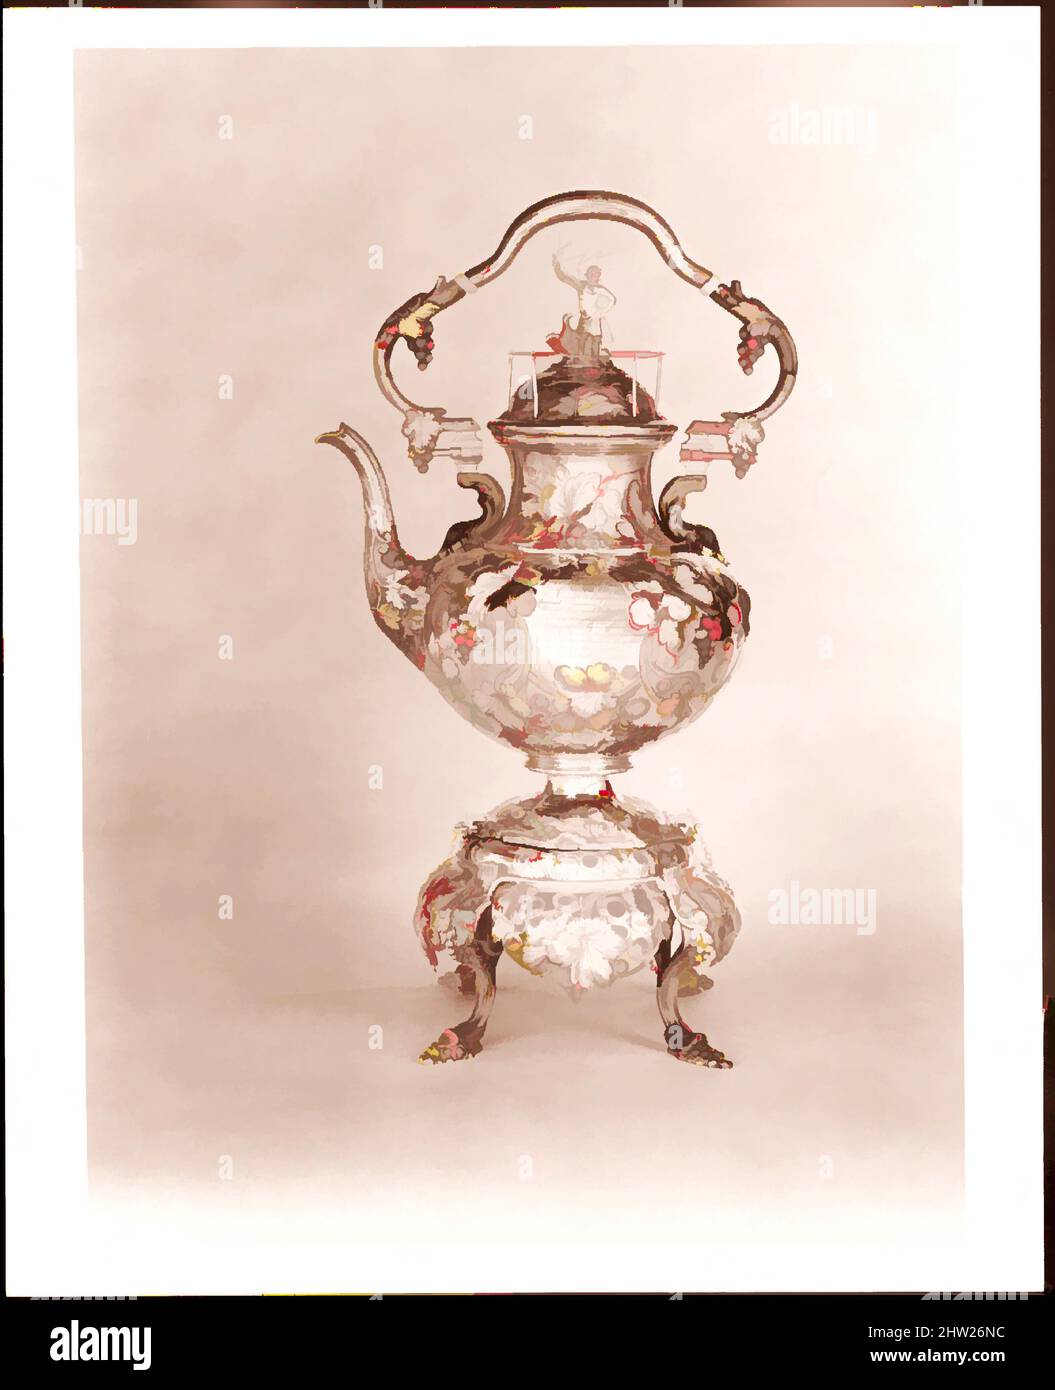 Art inspired by Teakettle, 1850, Made in New York, New York, United States, American, Silver, Overall: 17 3/16 x 9 3/4 x 8 9/16 in. (43.7 x 24.8 x 21.7 cm); 75 oz. 12 dwt., Silver, John C. Moore (ca. 1802–1874), In 1850, Marshall Lefferts, president of the New York and New England and, Classic works modernized by Artotop with a splash of modernity. Shapes, color and value, eye-catching visual impact on art. Emotions through freedom of artworks in a contemporary way. A timeless message pursuing a wildly creative new direction. Artists turning to the digital medium and creating the Artotop NFT Stock Photo